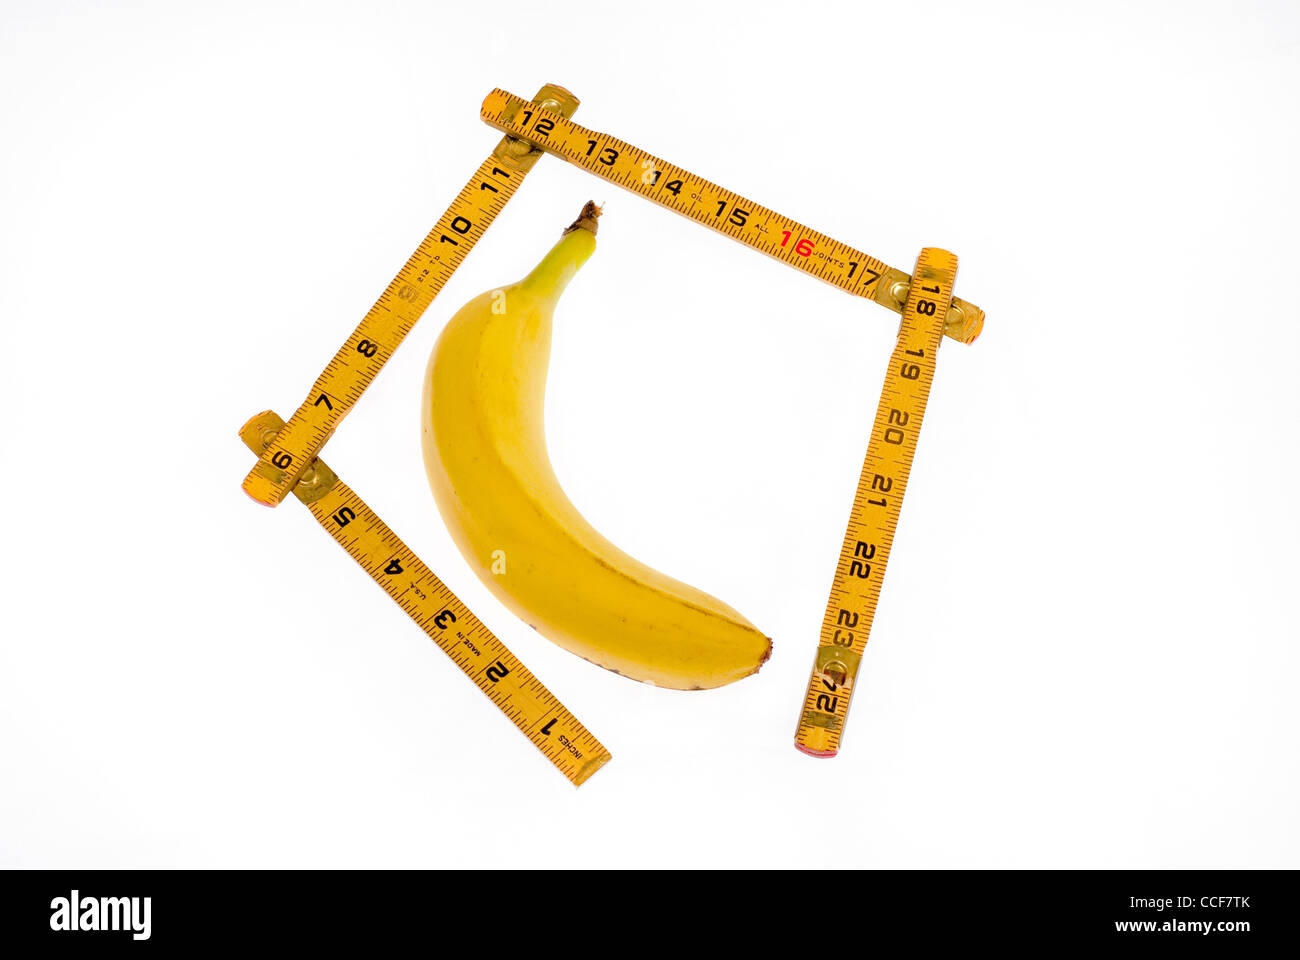 This banana is getting measured with a ruler Stock Photo